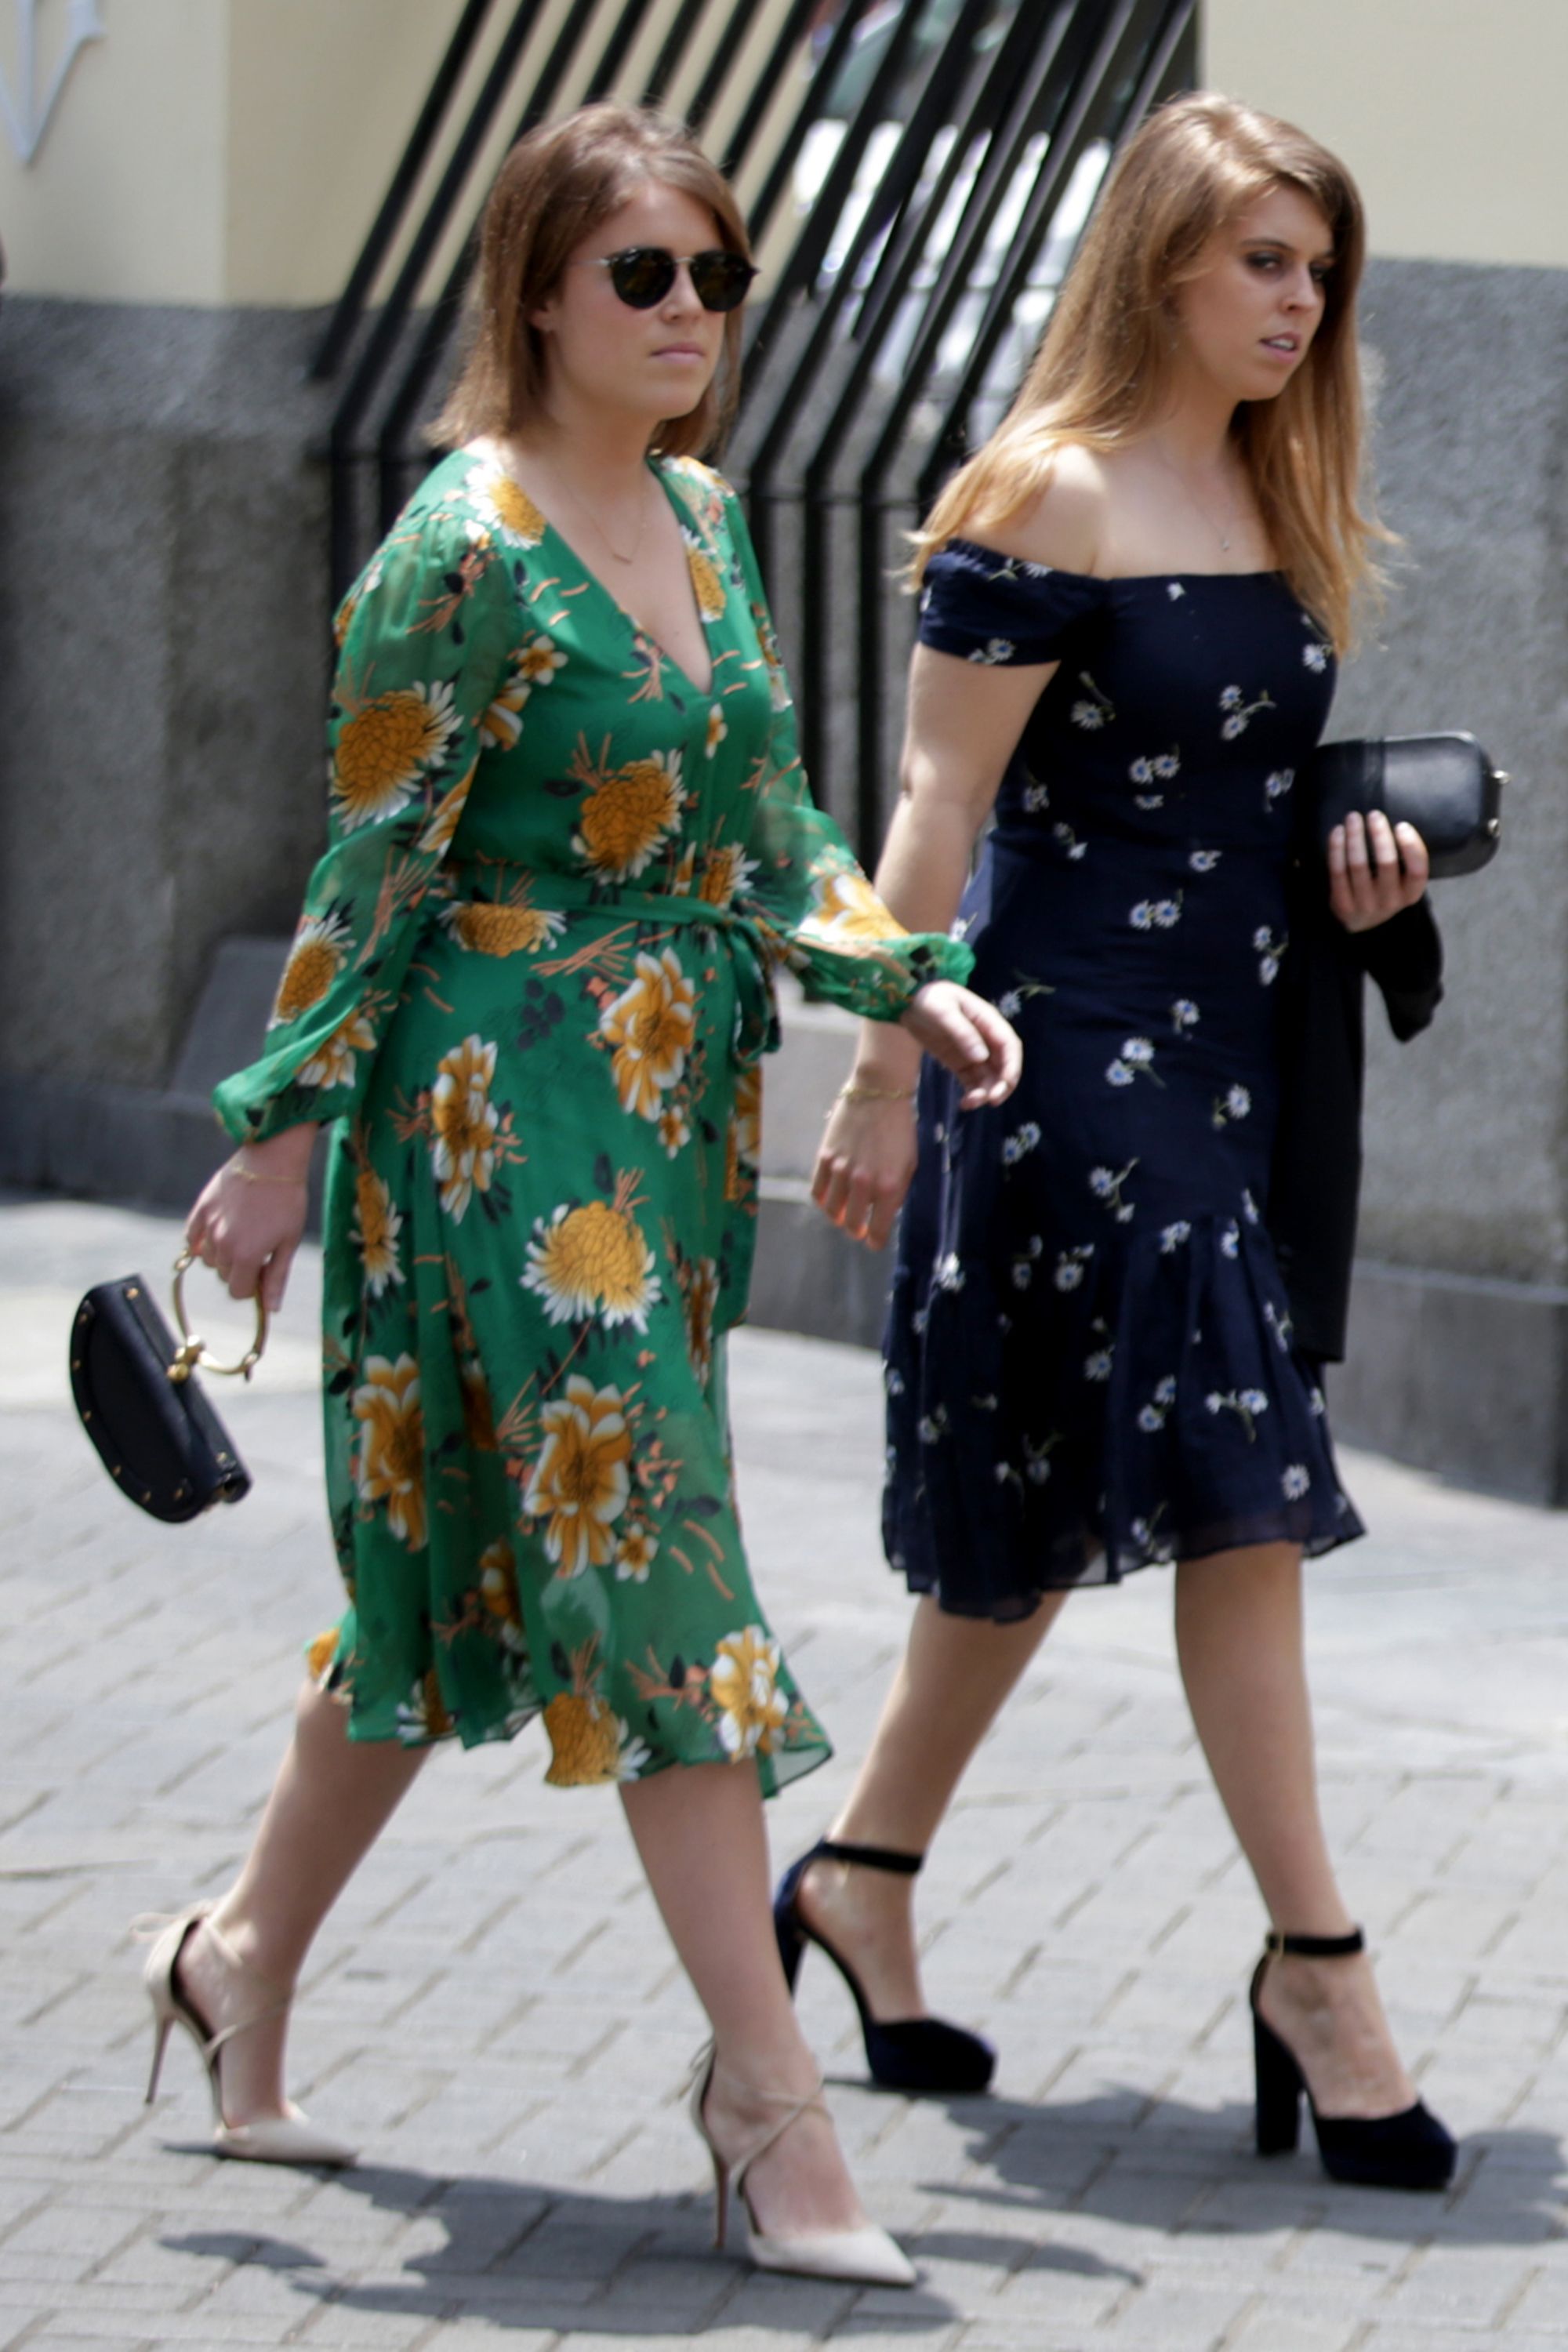 chef Beroligende middel Aktuator Princess Eugenie and Princess Beatrice: their life in style